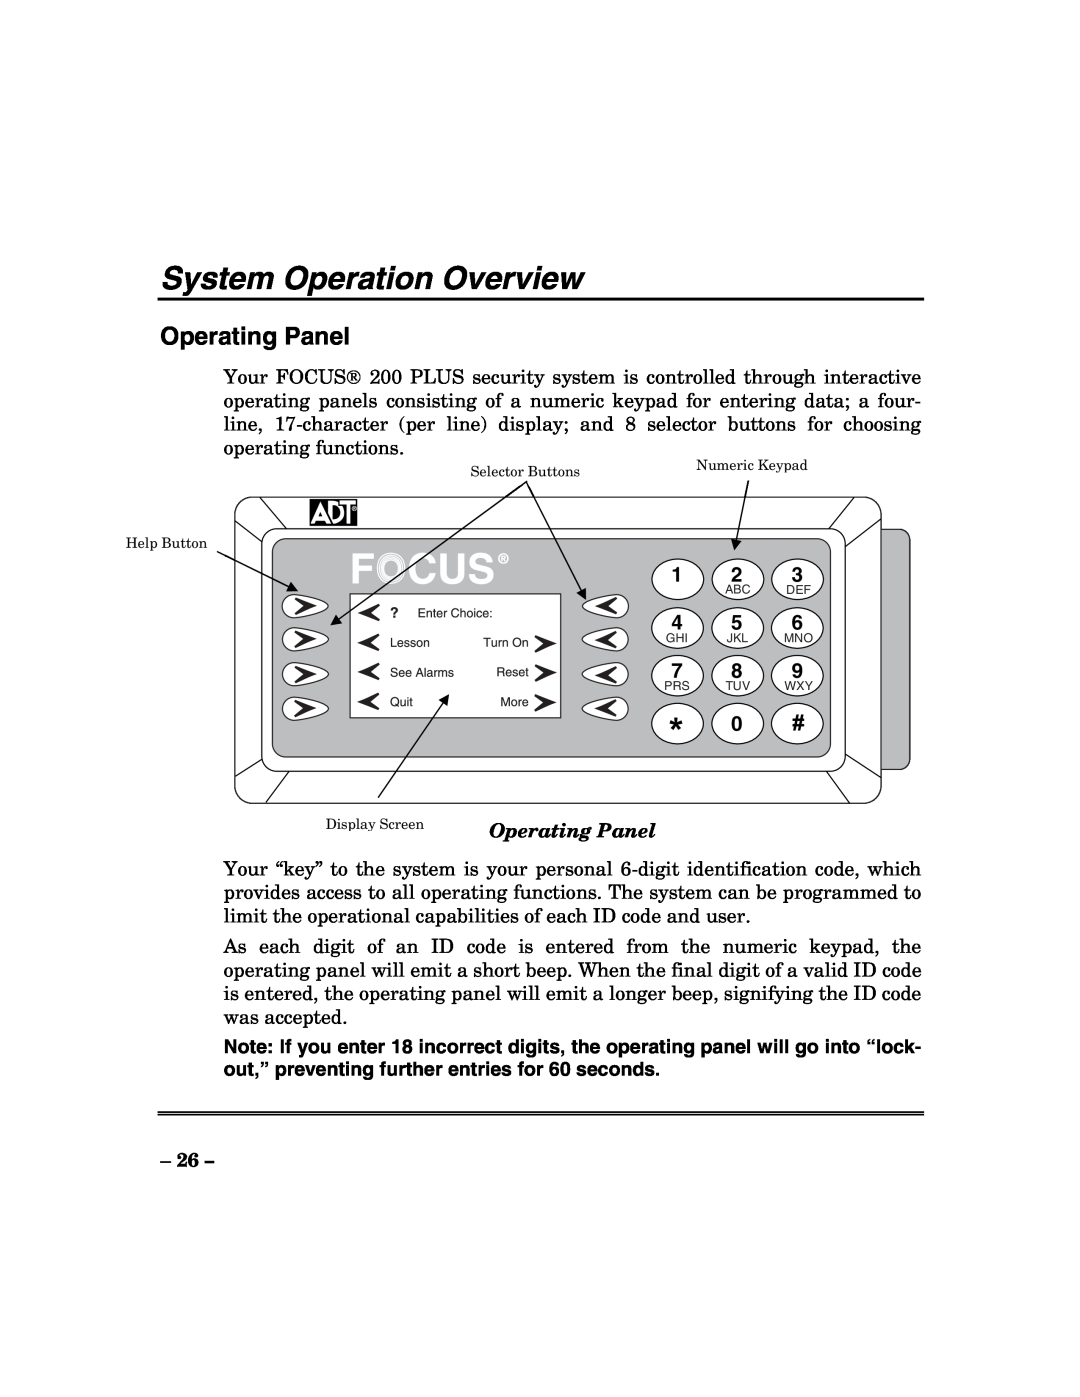 ADT Security Services 200 Plus manual System Operation Overview, Operating Panel 